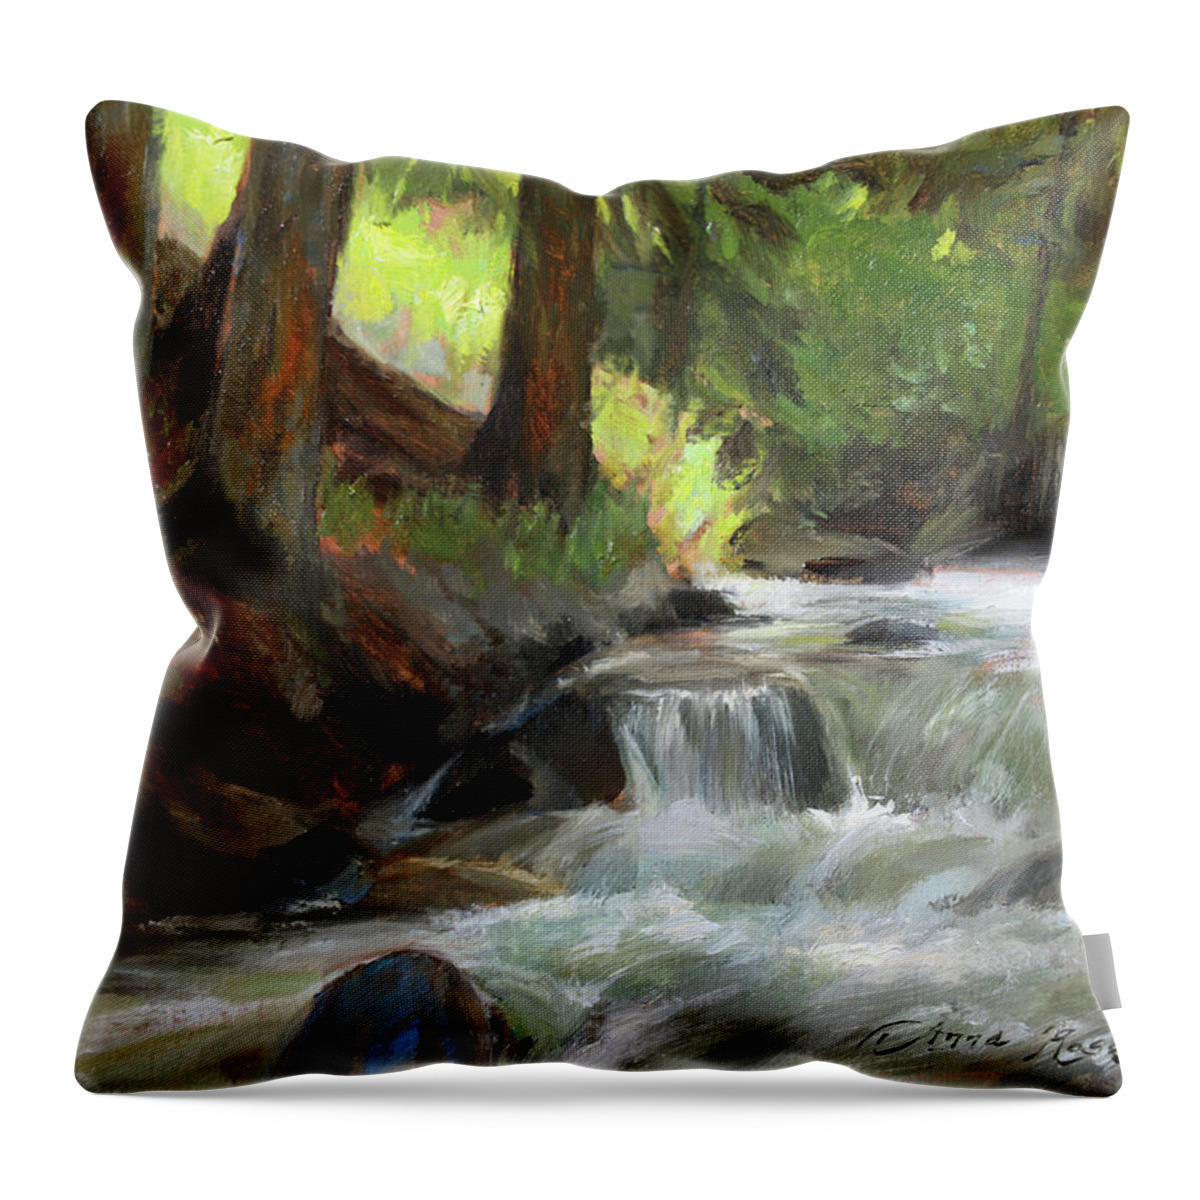 Landscape Throw Pillow featuring the painting Light Patch, Guanella Pass Stream by Anna Rose Bain